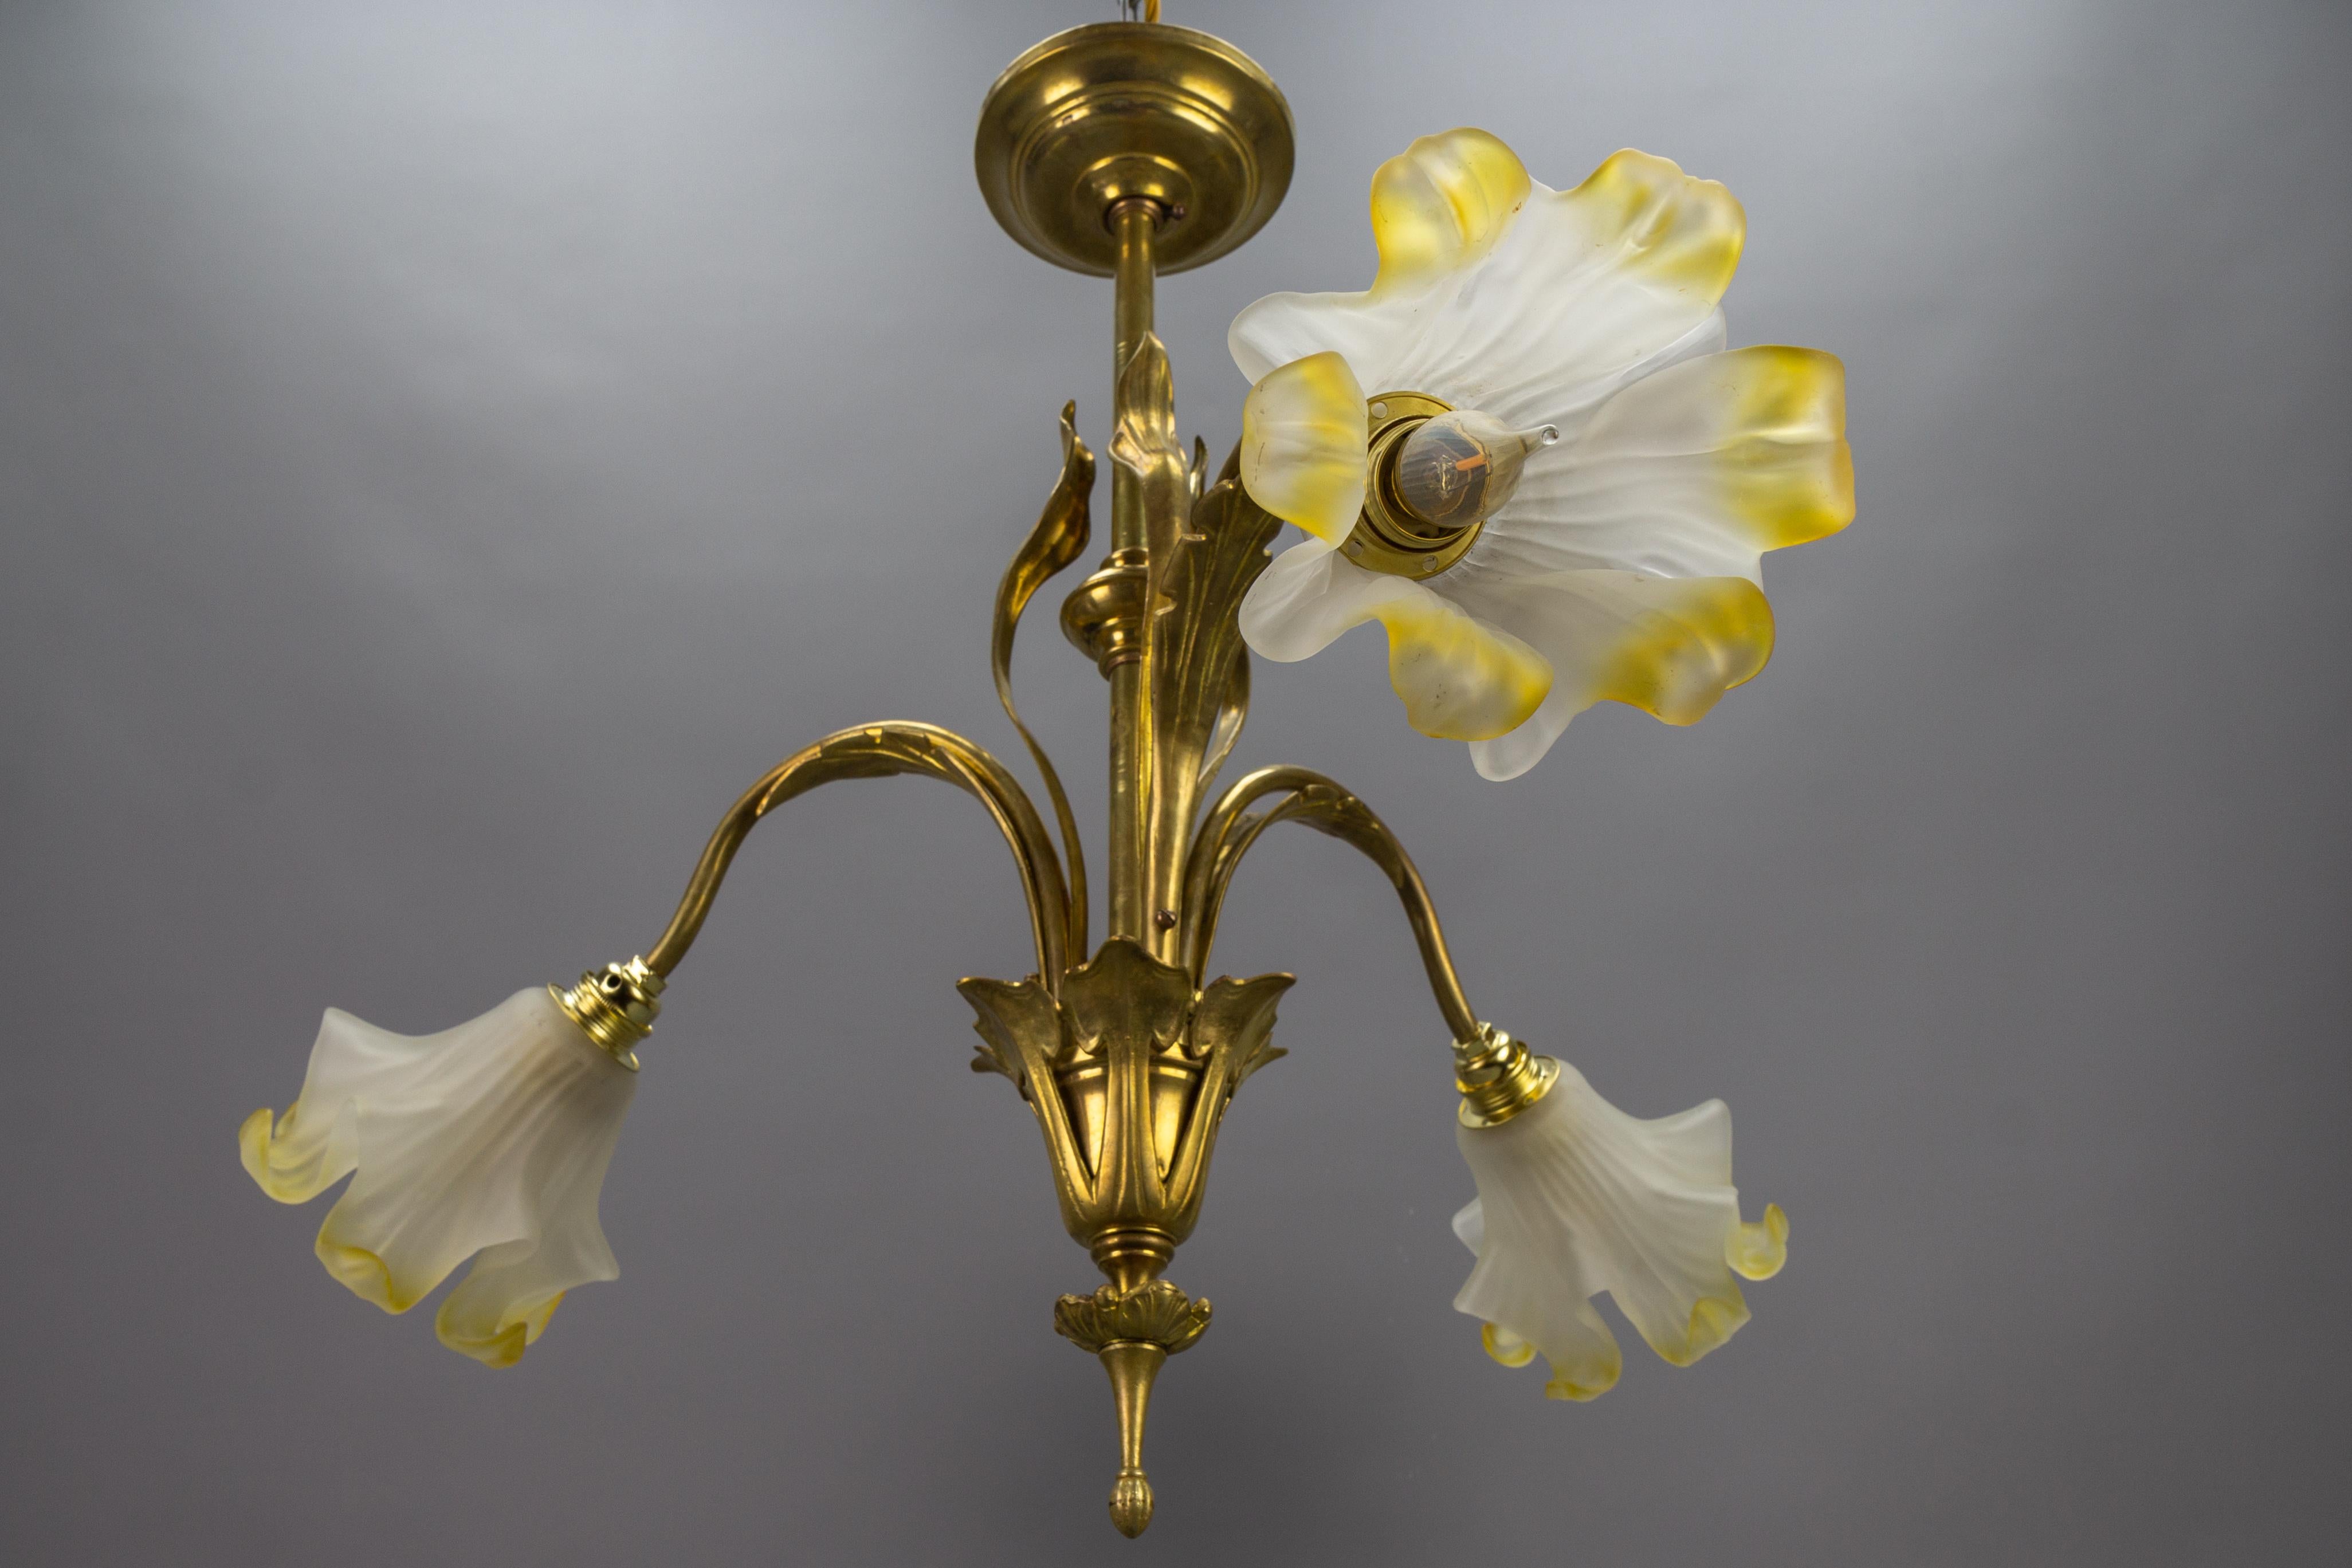 French Art Nouveau Brass and Glass Three-Light Iris-Shaped Chandelier, ca. 1910 For Sale 2